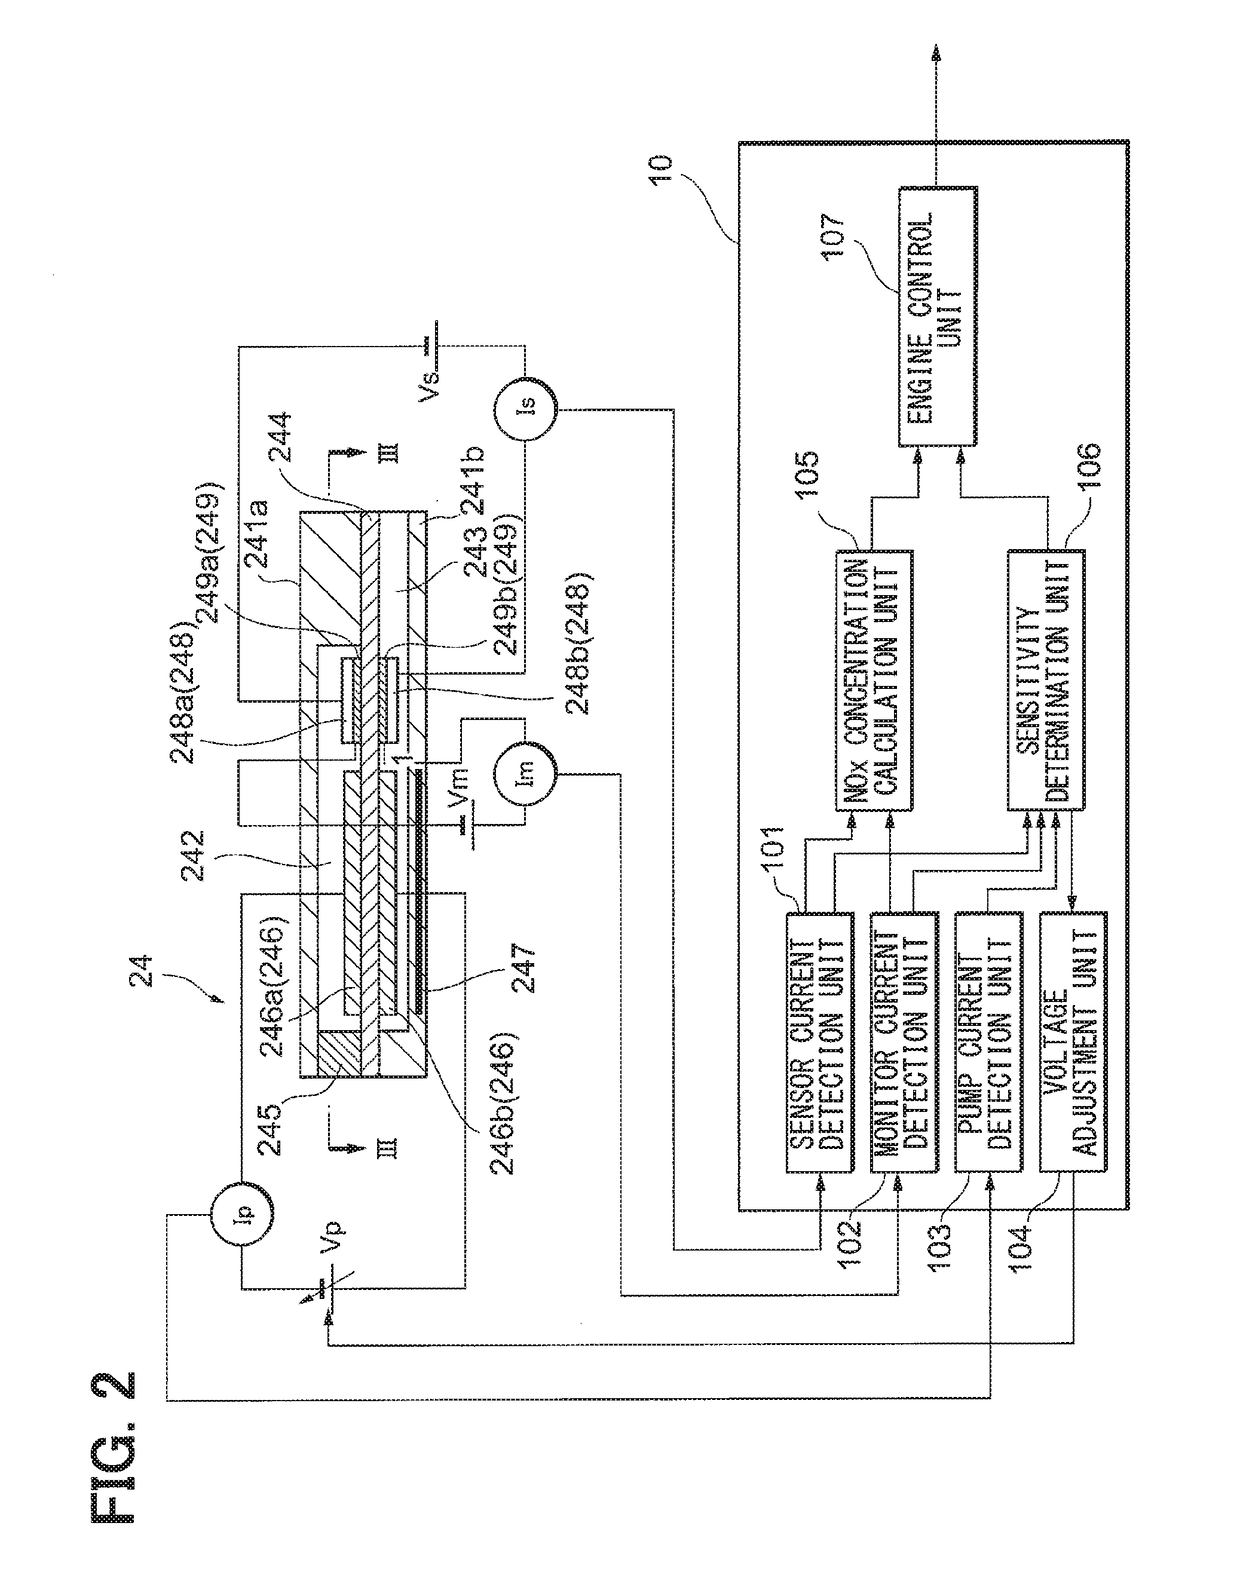 Gas concentration detection device